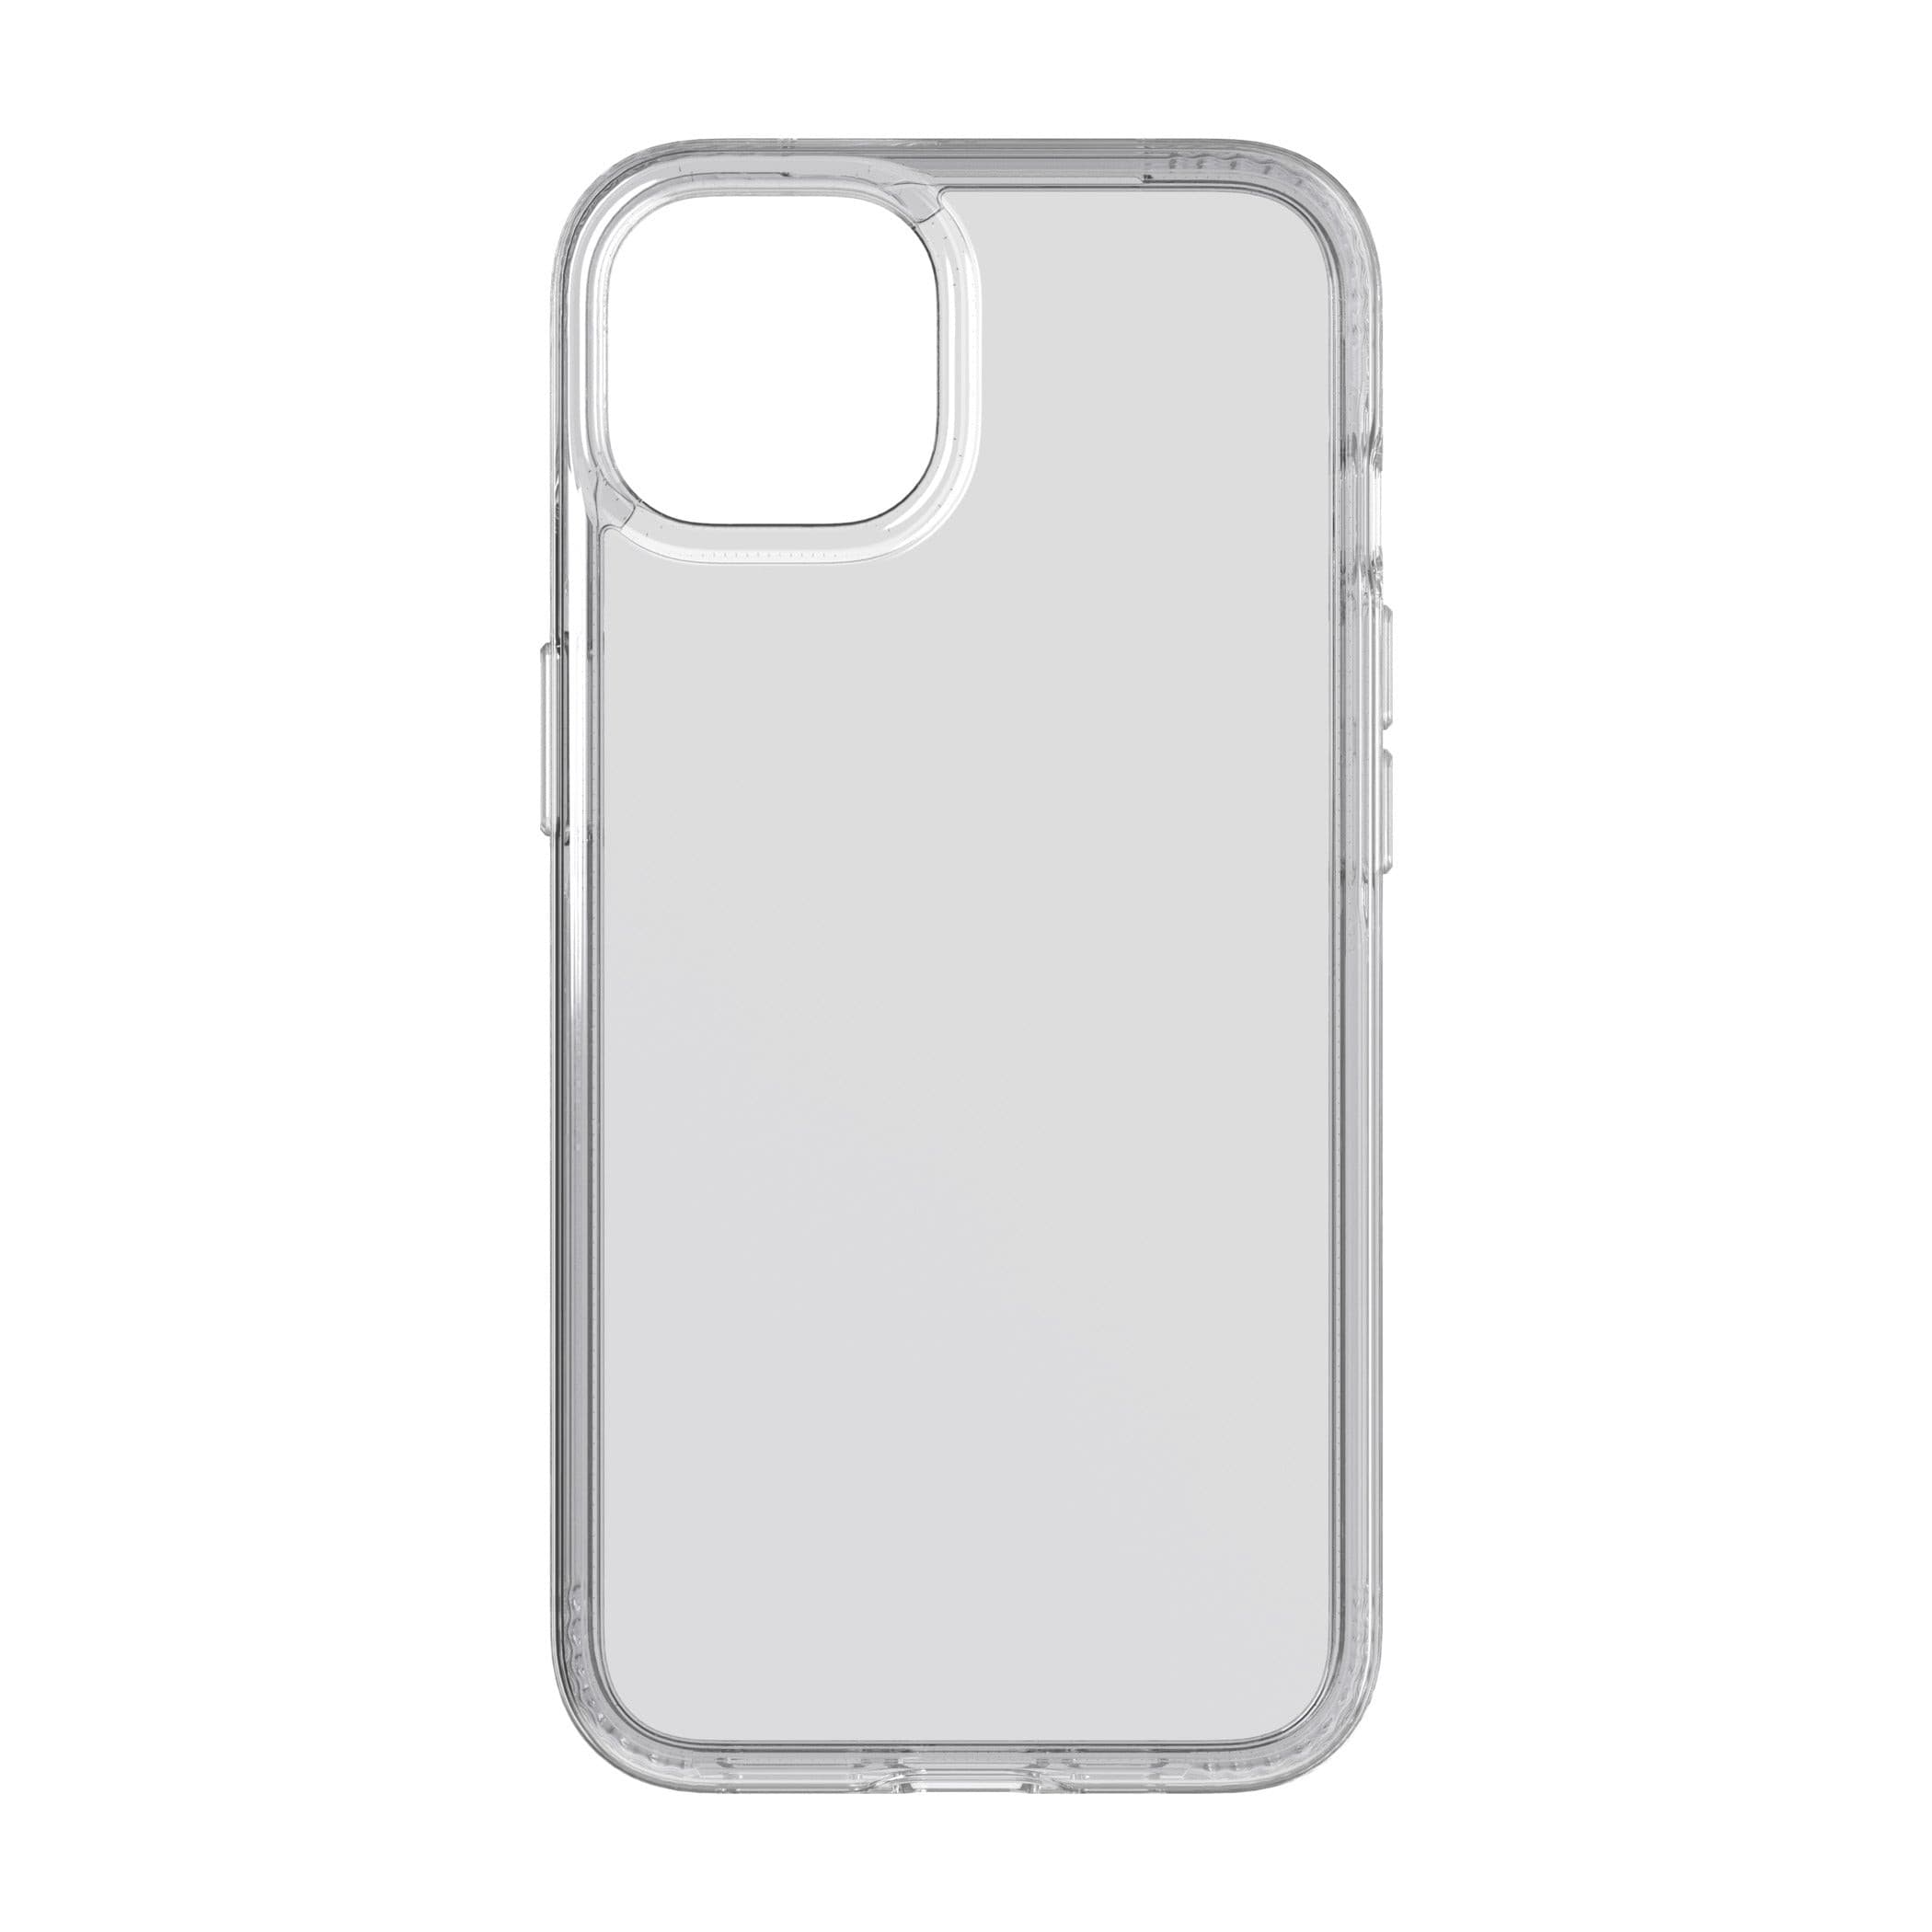 Tech21 EvoClear Phone Case for iPhone 13 - Clear.